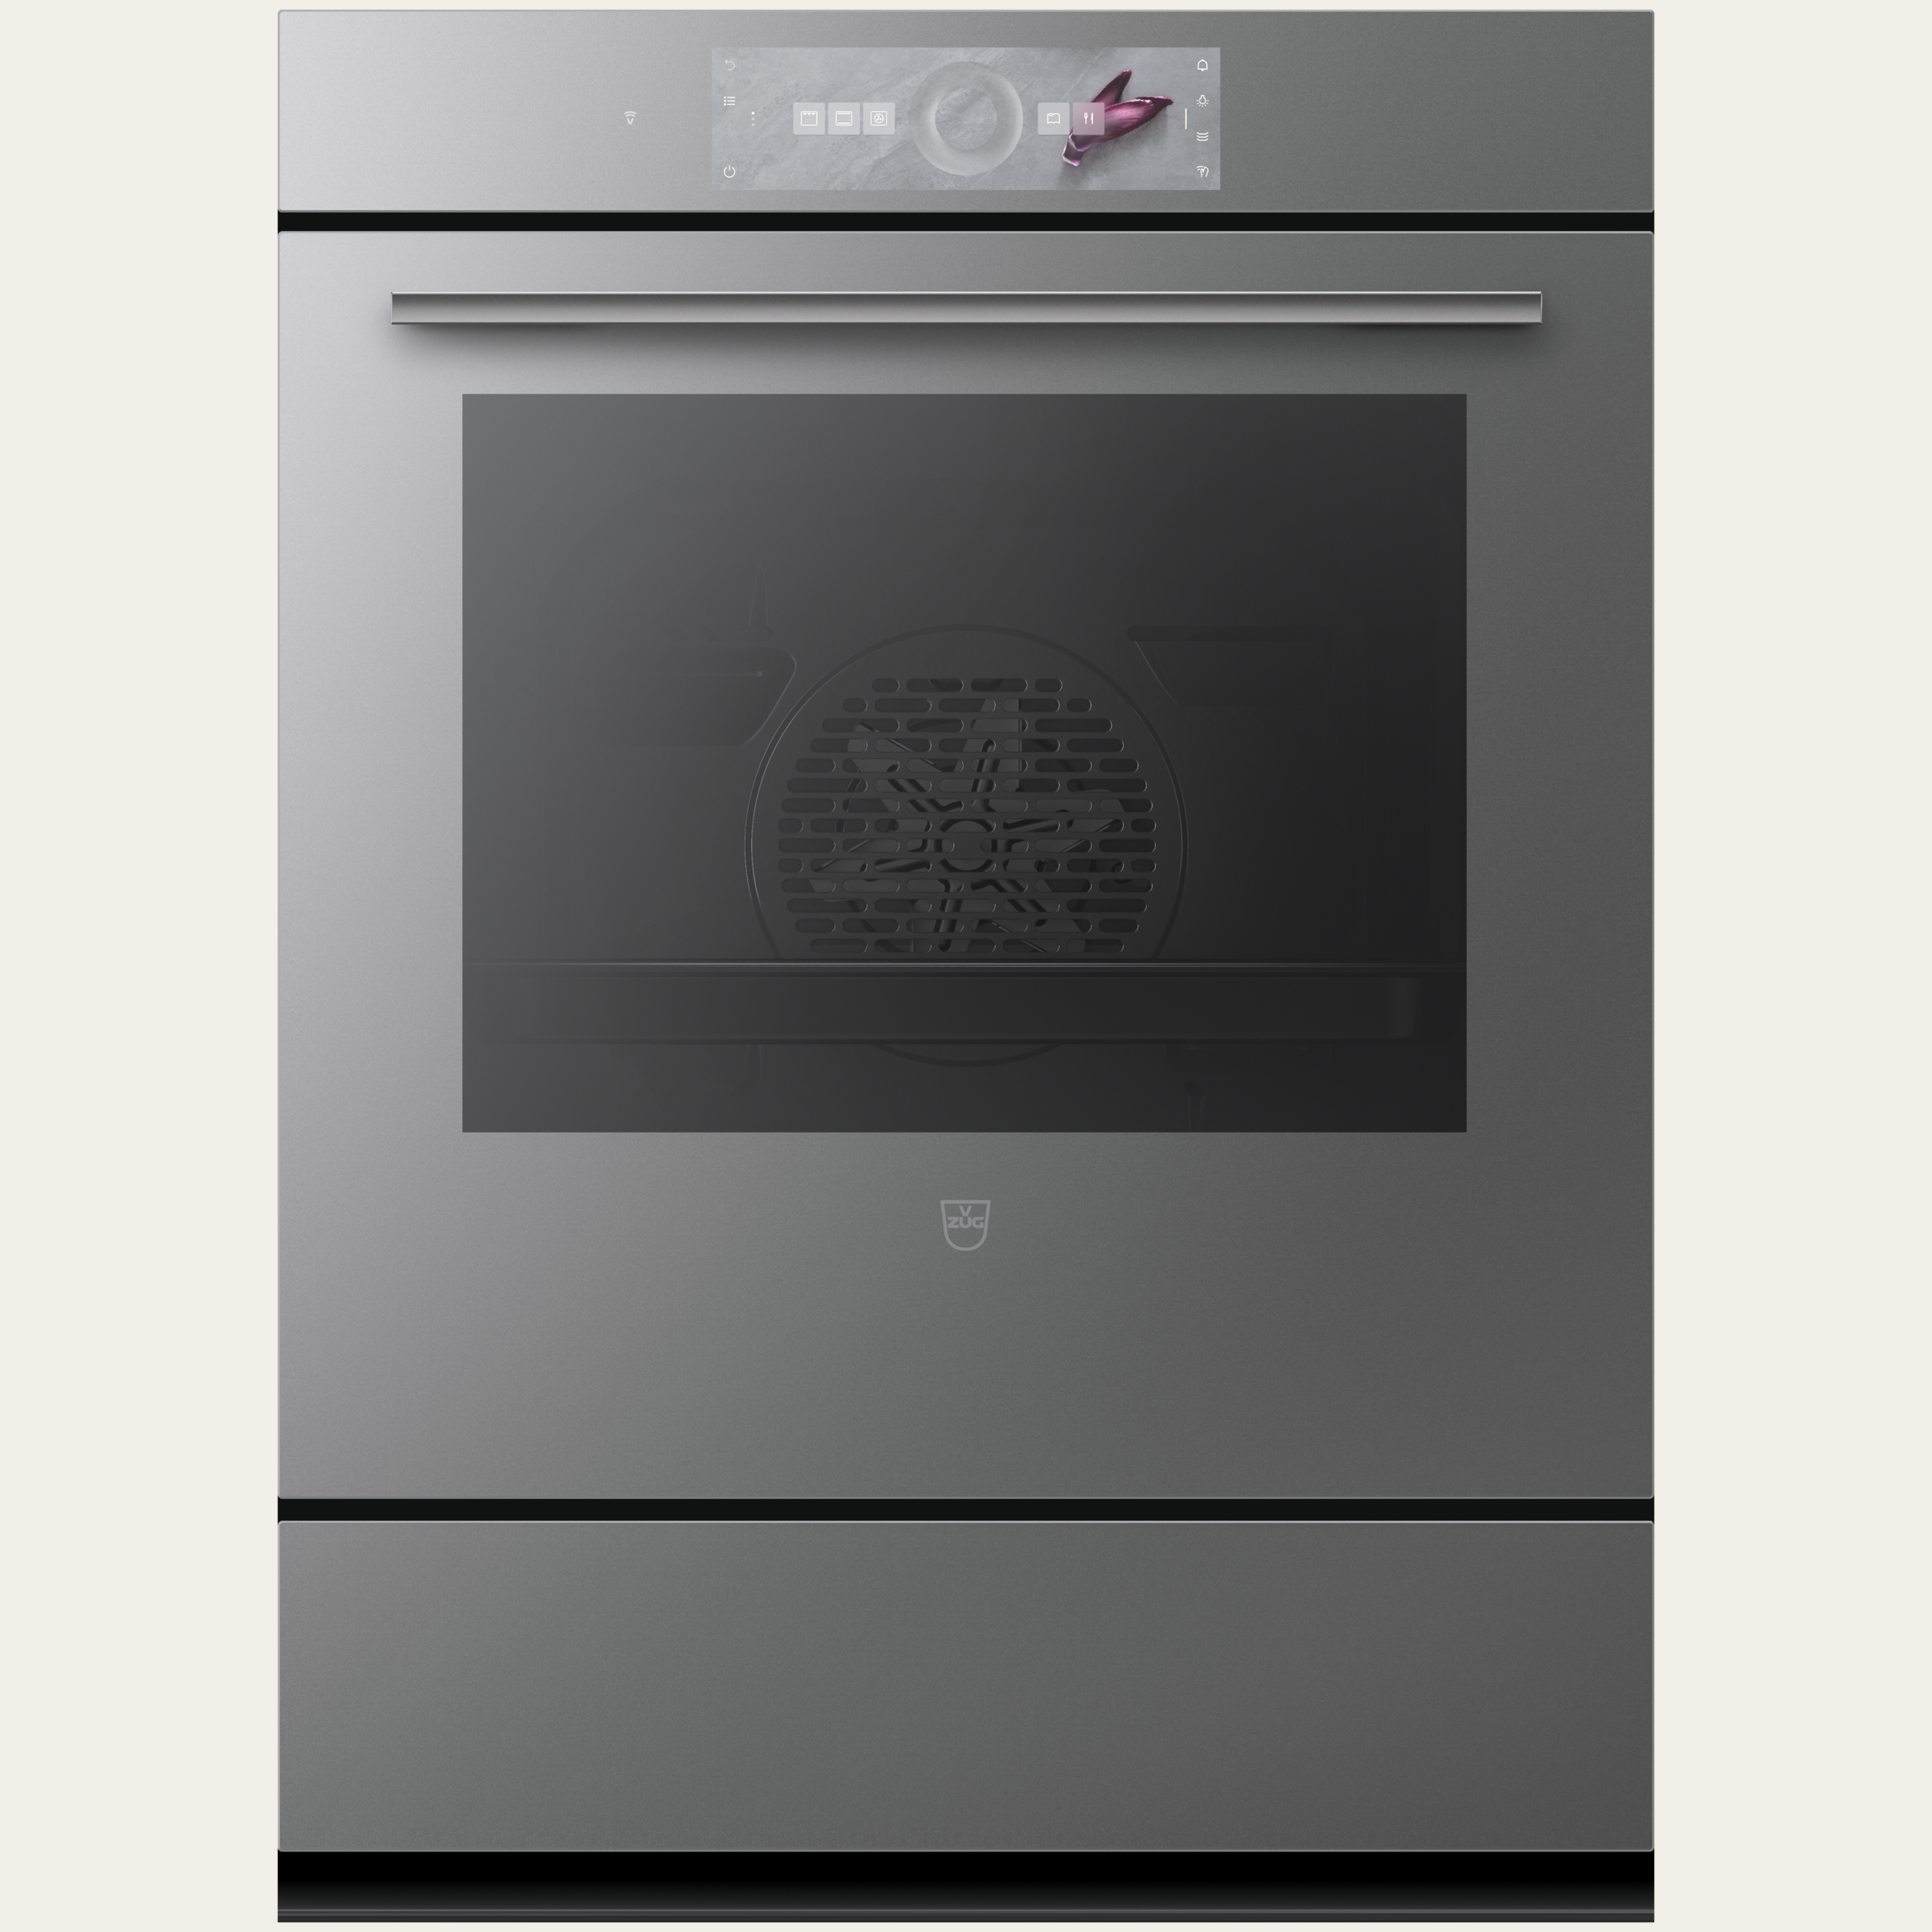 V-ZUG Oven Combair V6000 76PC, Standard width: 55 cm, Standard height: 76.2 cm, Platinum mirror glass, Touchscreen with CircleSlider, V-ZUG-Home, Heatable appliance drawer, Pyrolytic self-cleaning